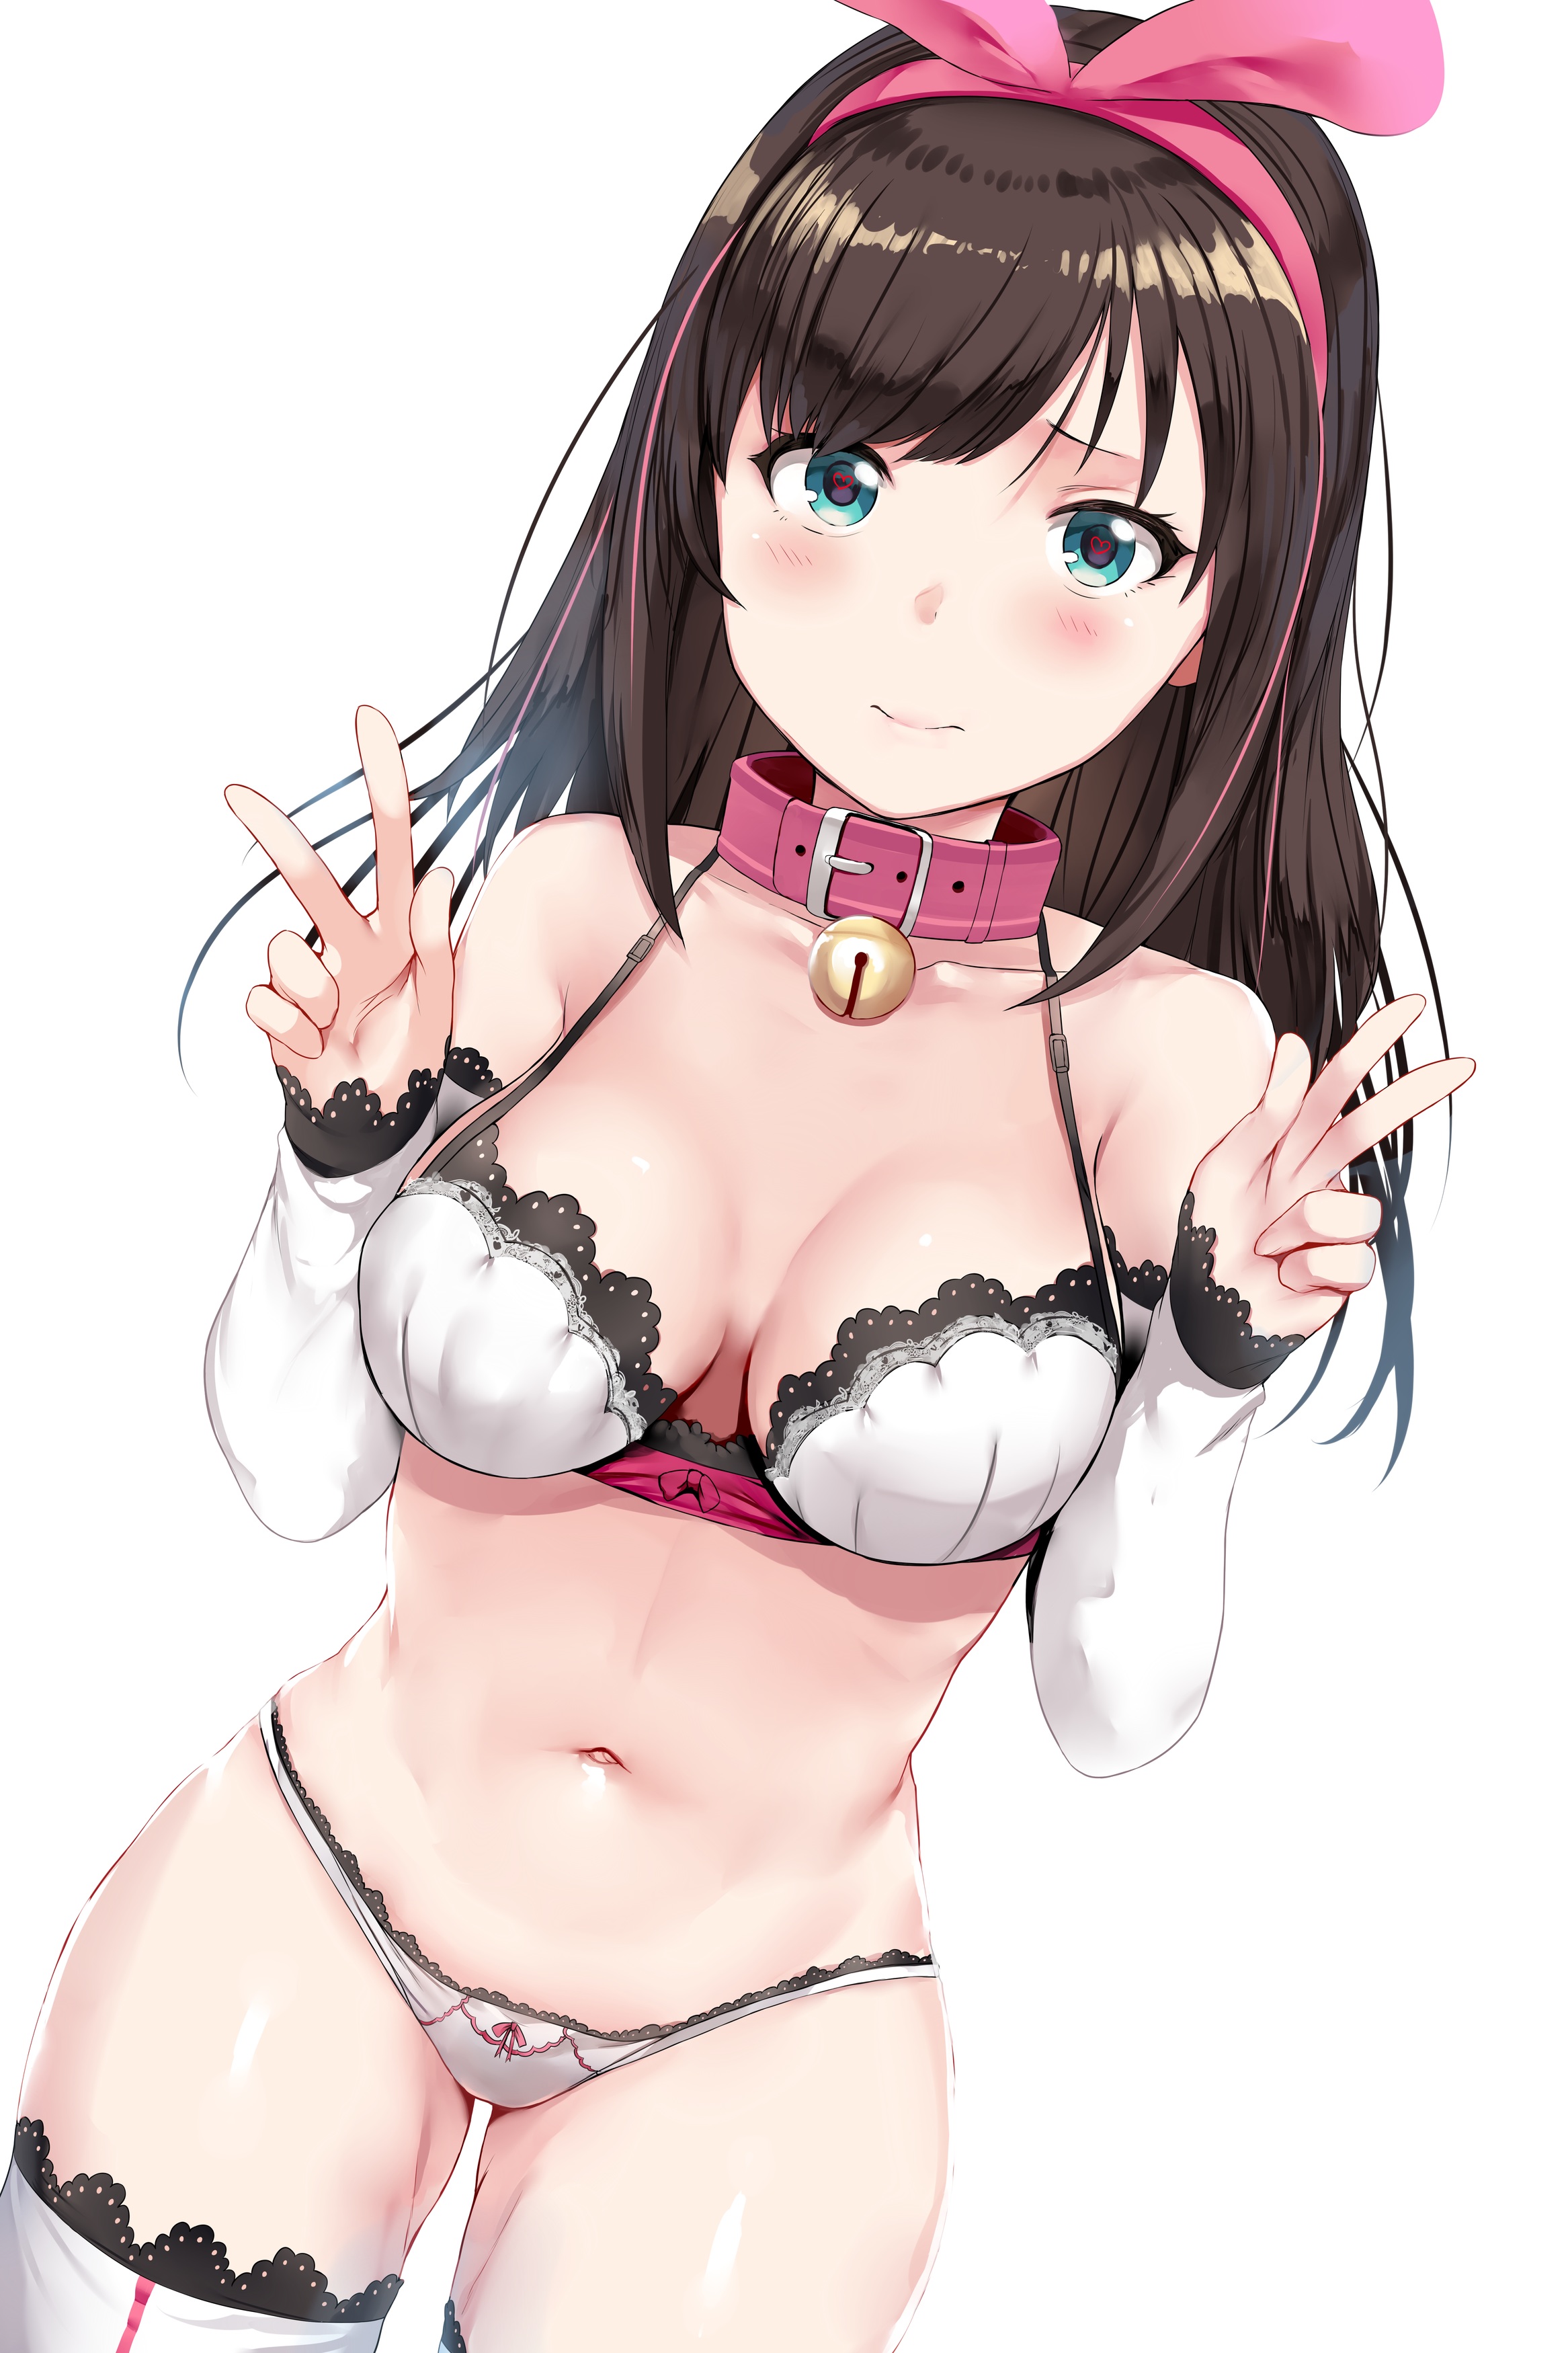 Anime 2333x3500 cleavage Hews belly frontal view anime girls underwear